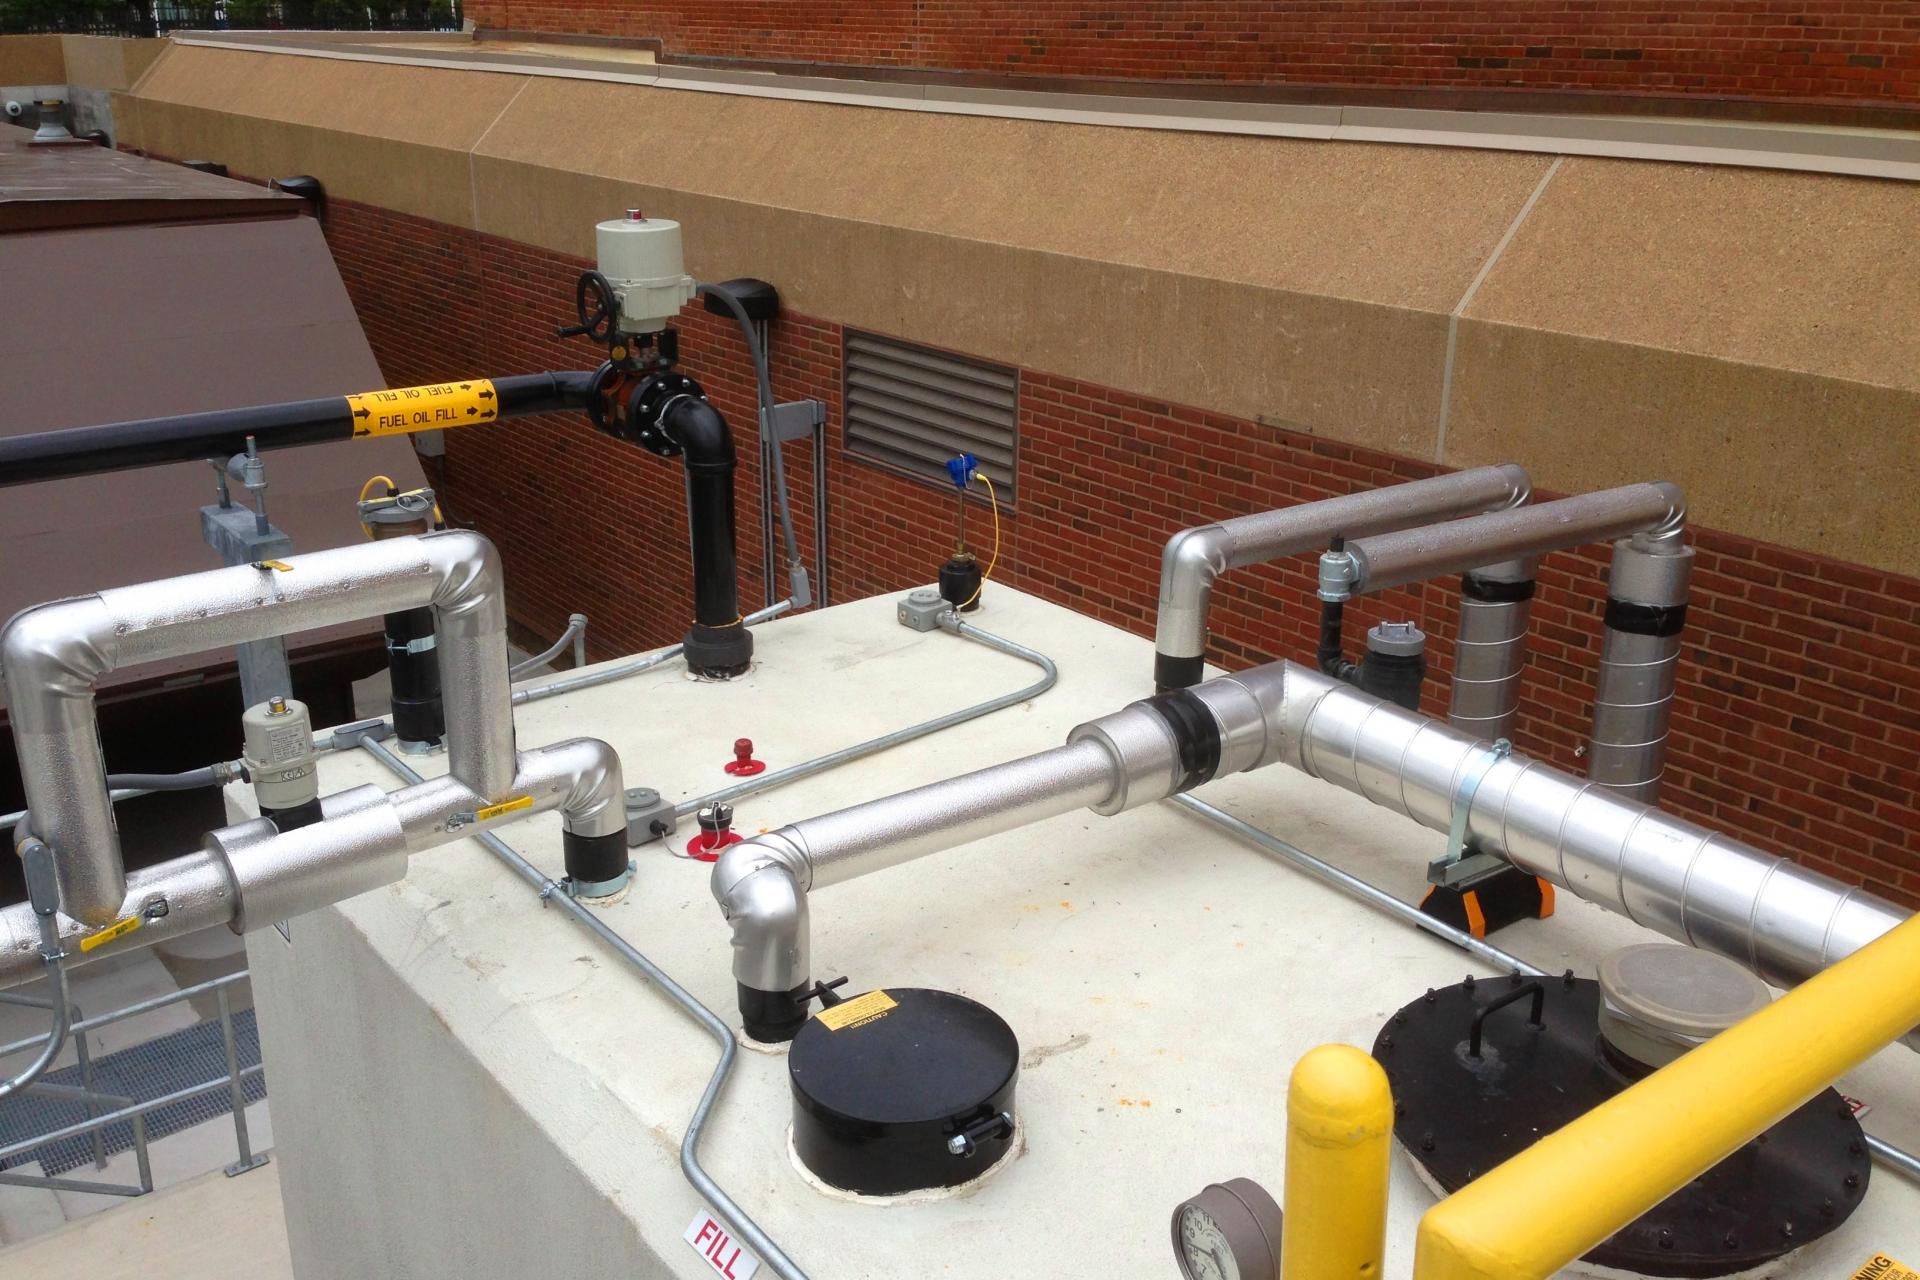 The secure mechanical and electrical yard support the 24x7x365 facility with redundant services.